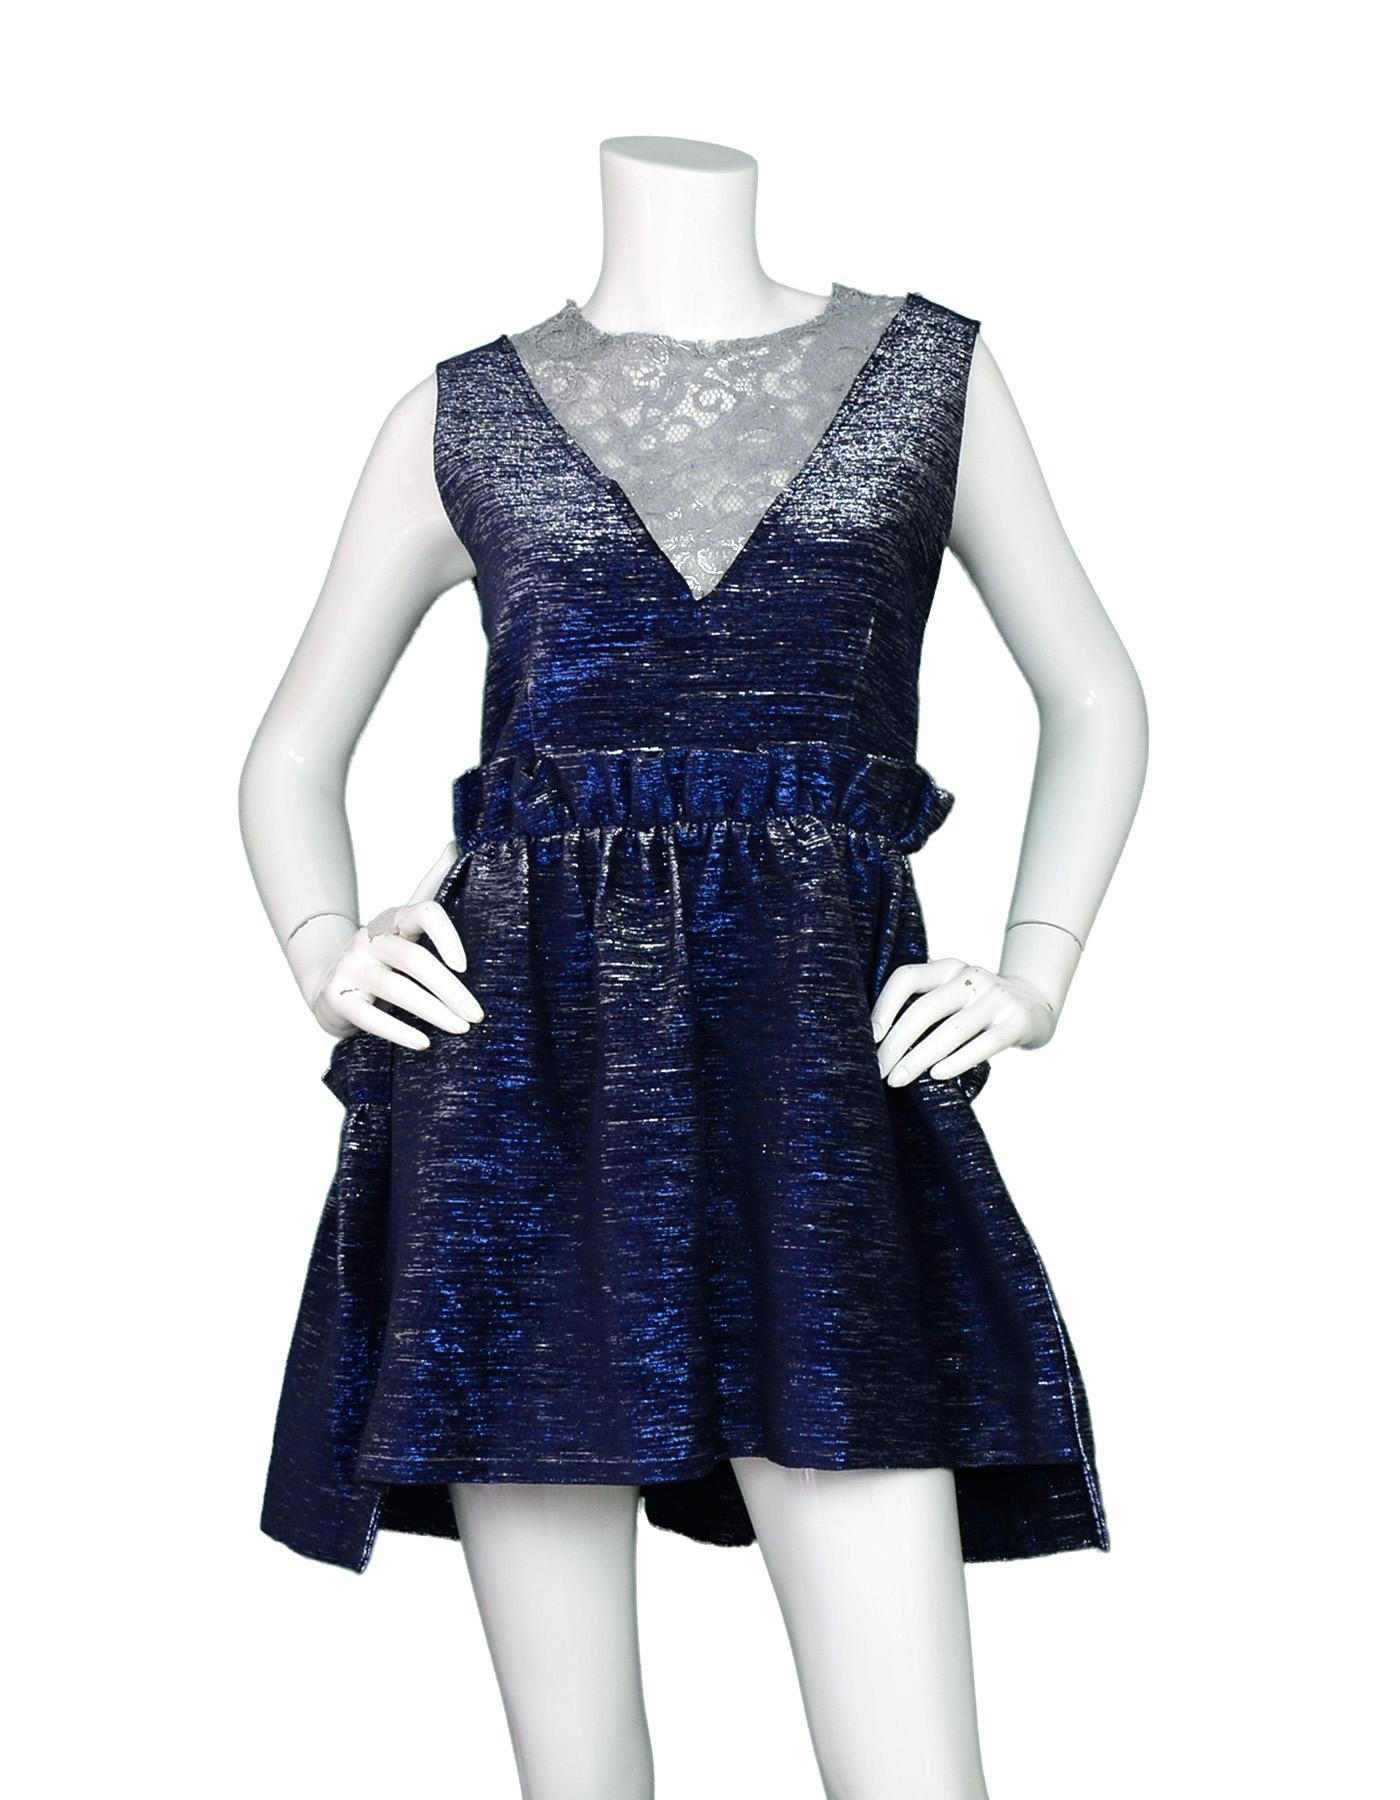 Jourden Blue Metallic Ruffle Dress W/ Silver Lace NWT Sz 42

Made In: China
Color: Blue and silver
Materials: Fabric 1: 65% acrylic, 30% polyester, 5% polymetal. Fabric 2: 90% Viscose, 10% Polyamide 
Opening/Closure: Hidden zipper in back
Overall